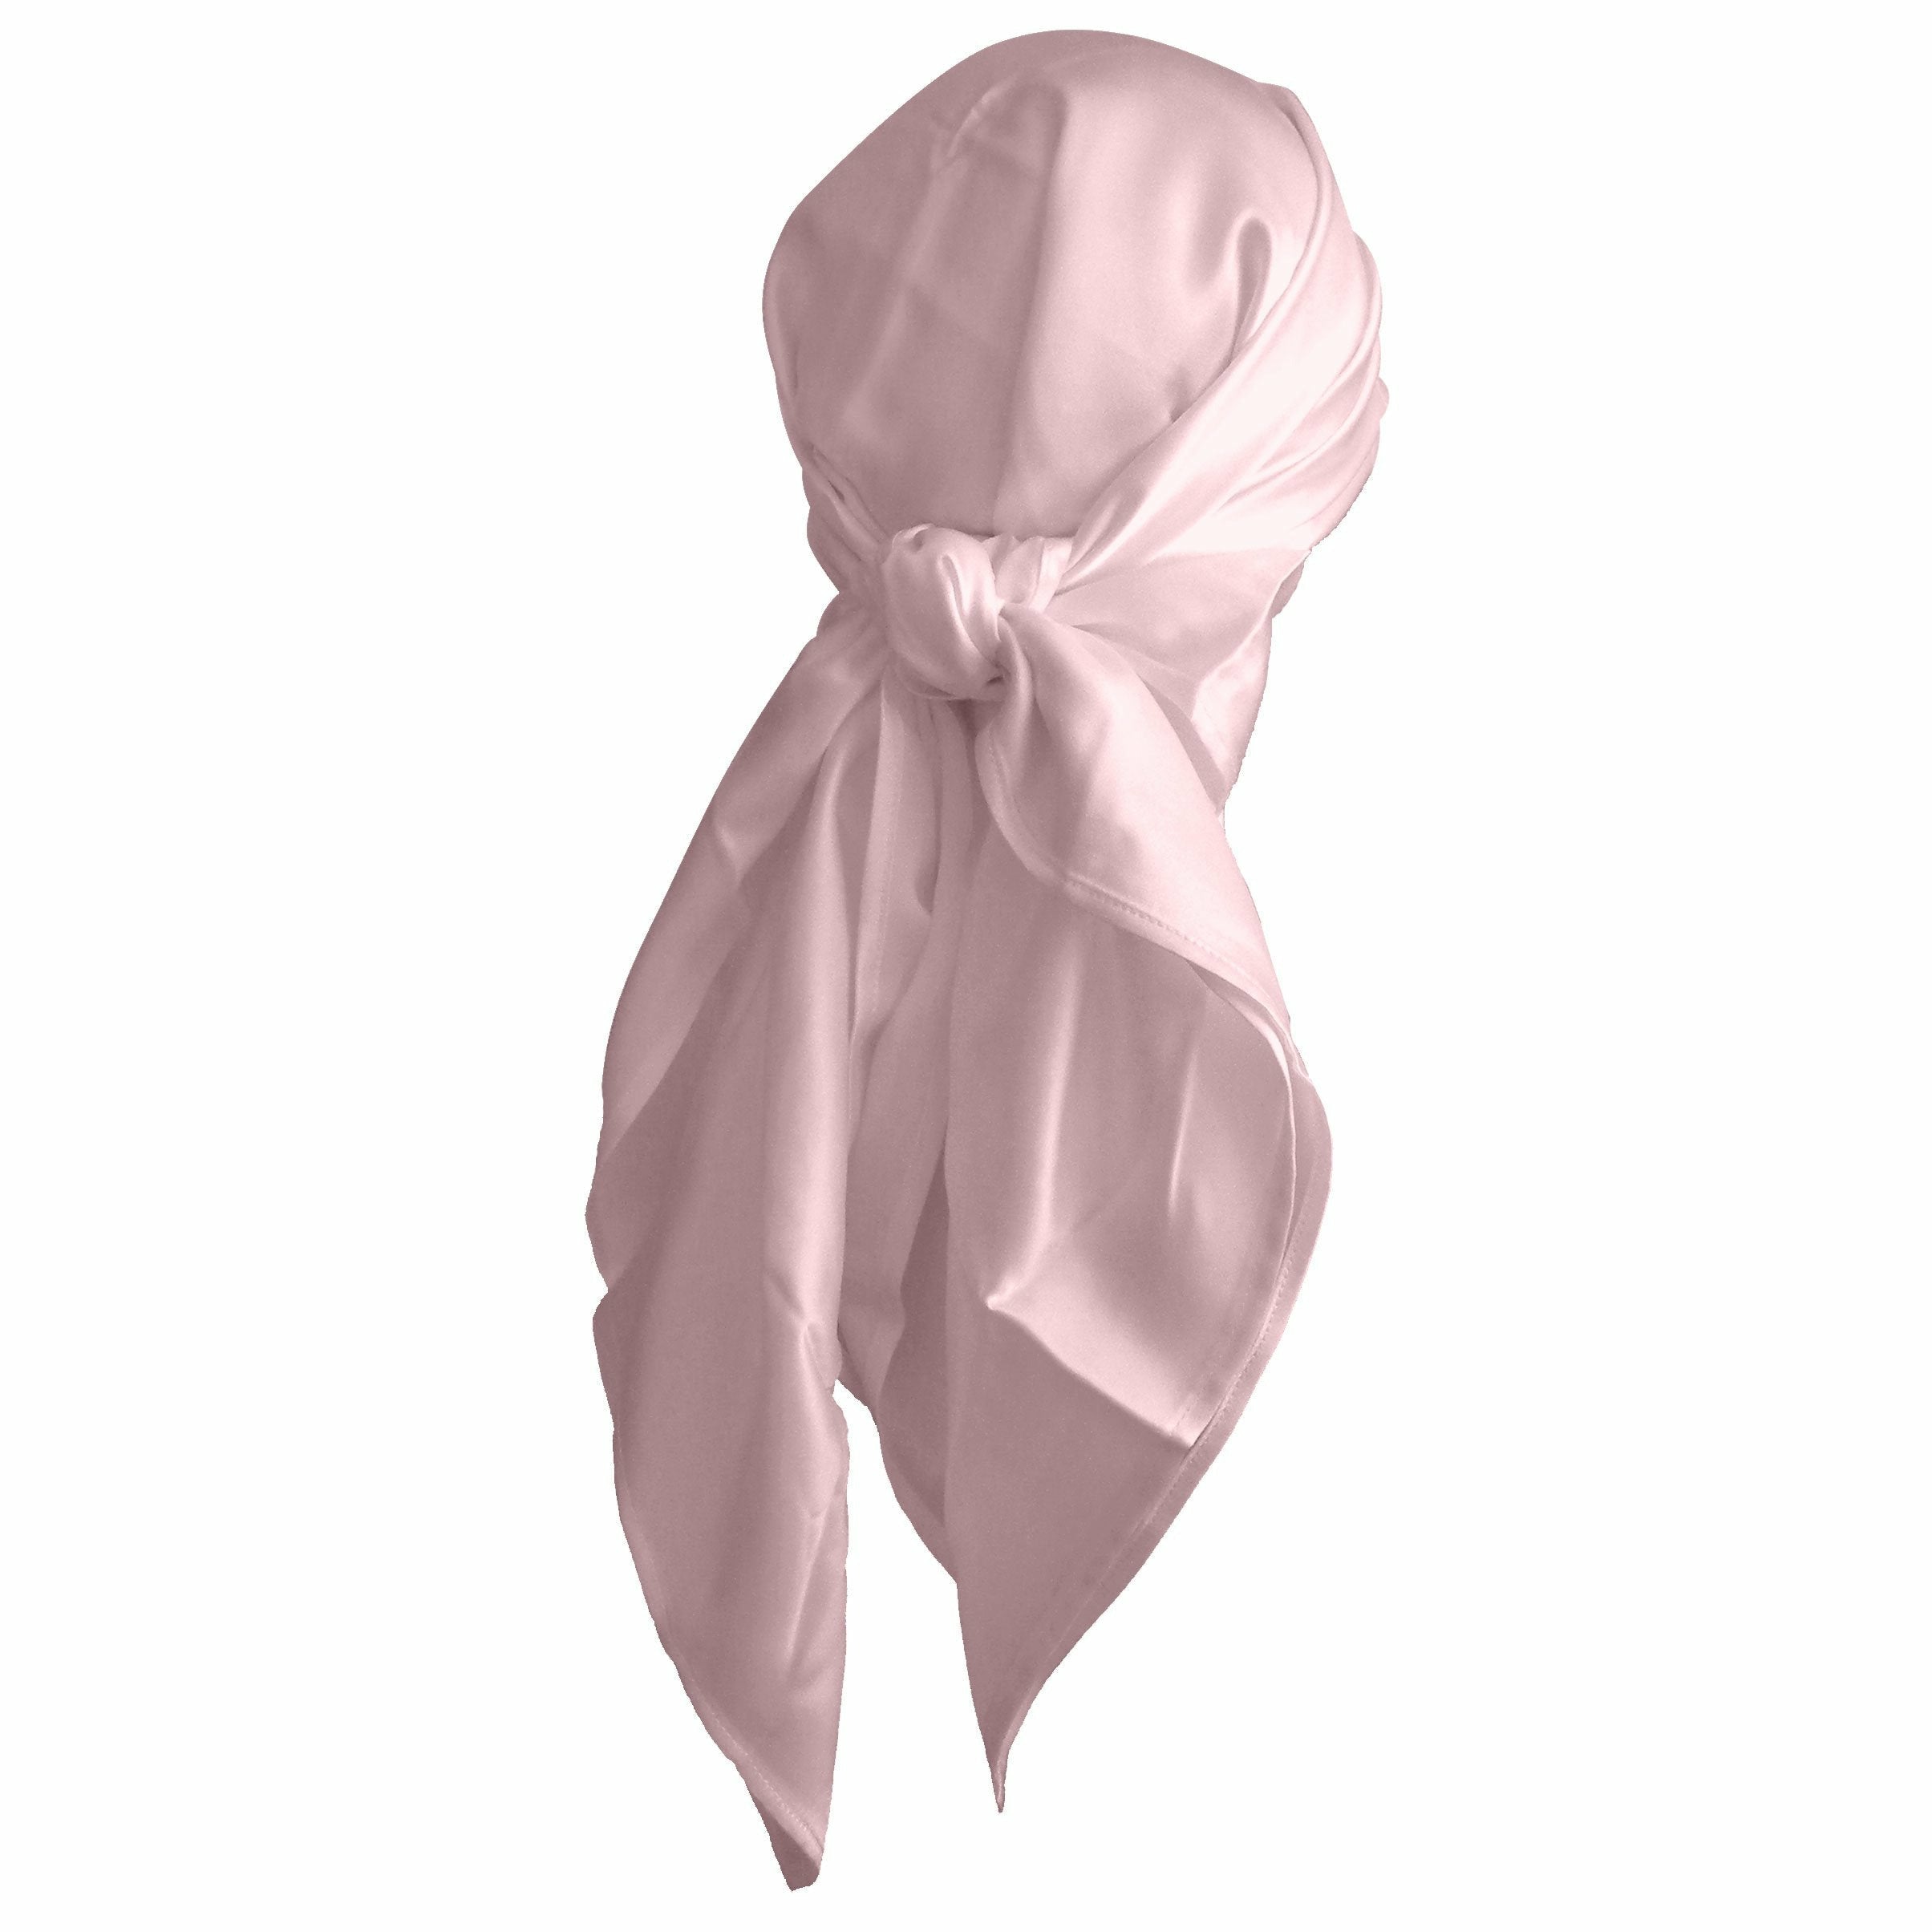 LILYSILK 100 Silk Head Scarf 0 Rosy Pink Protect Your Hair Skin Friendly Add Luxury to Home